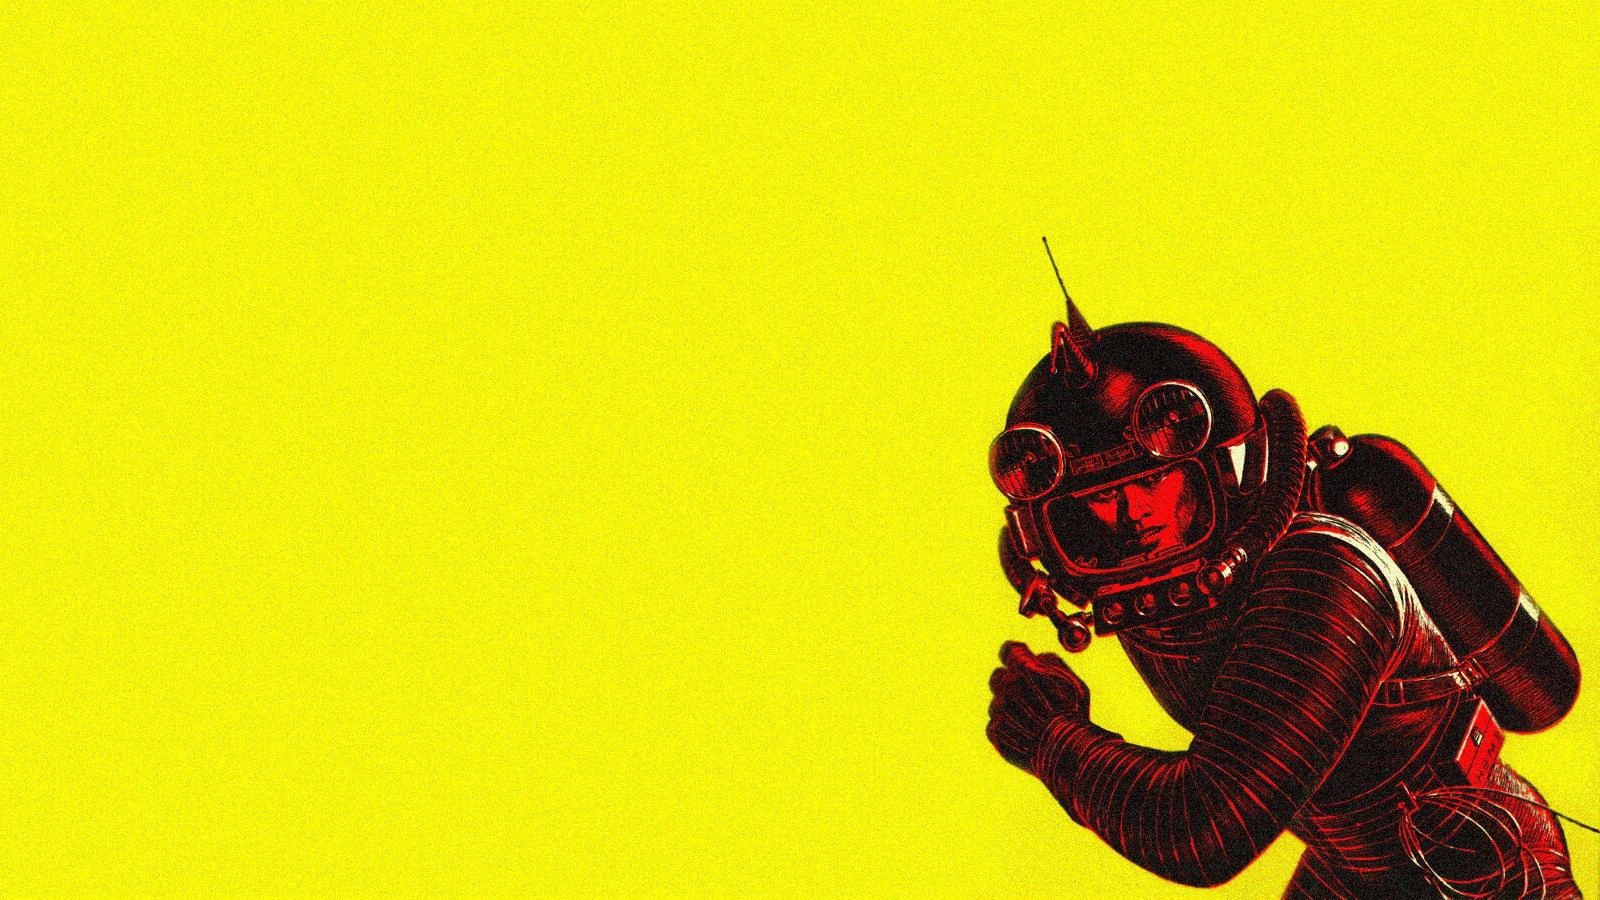 retro space wallpaper,red,yellow,fictional character,illustration,superhero